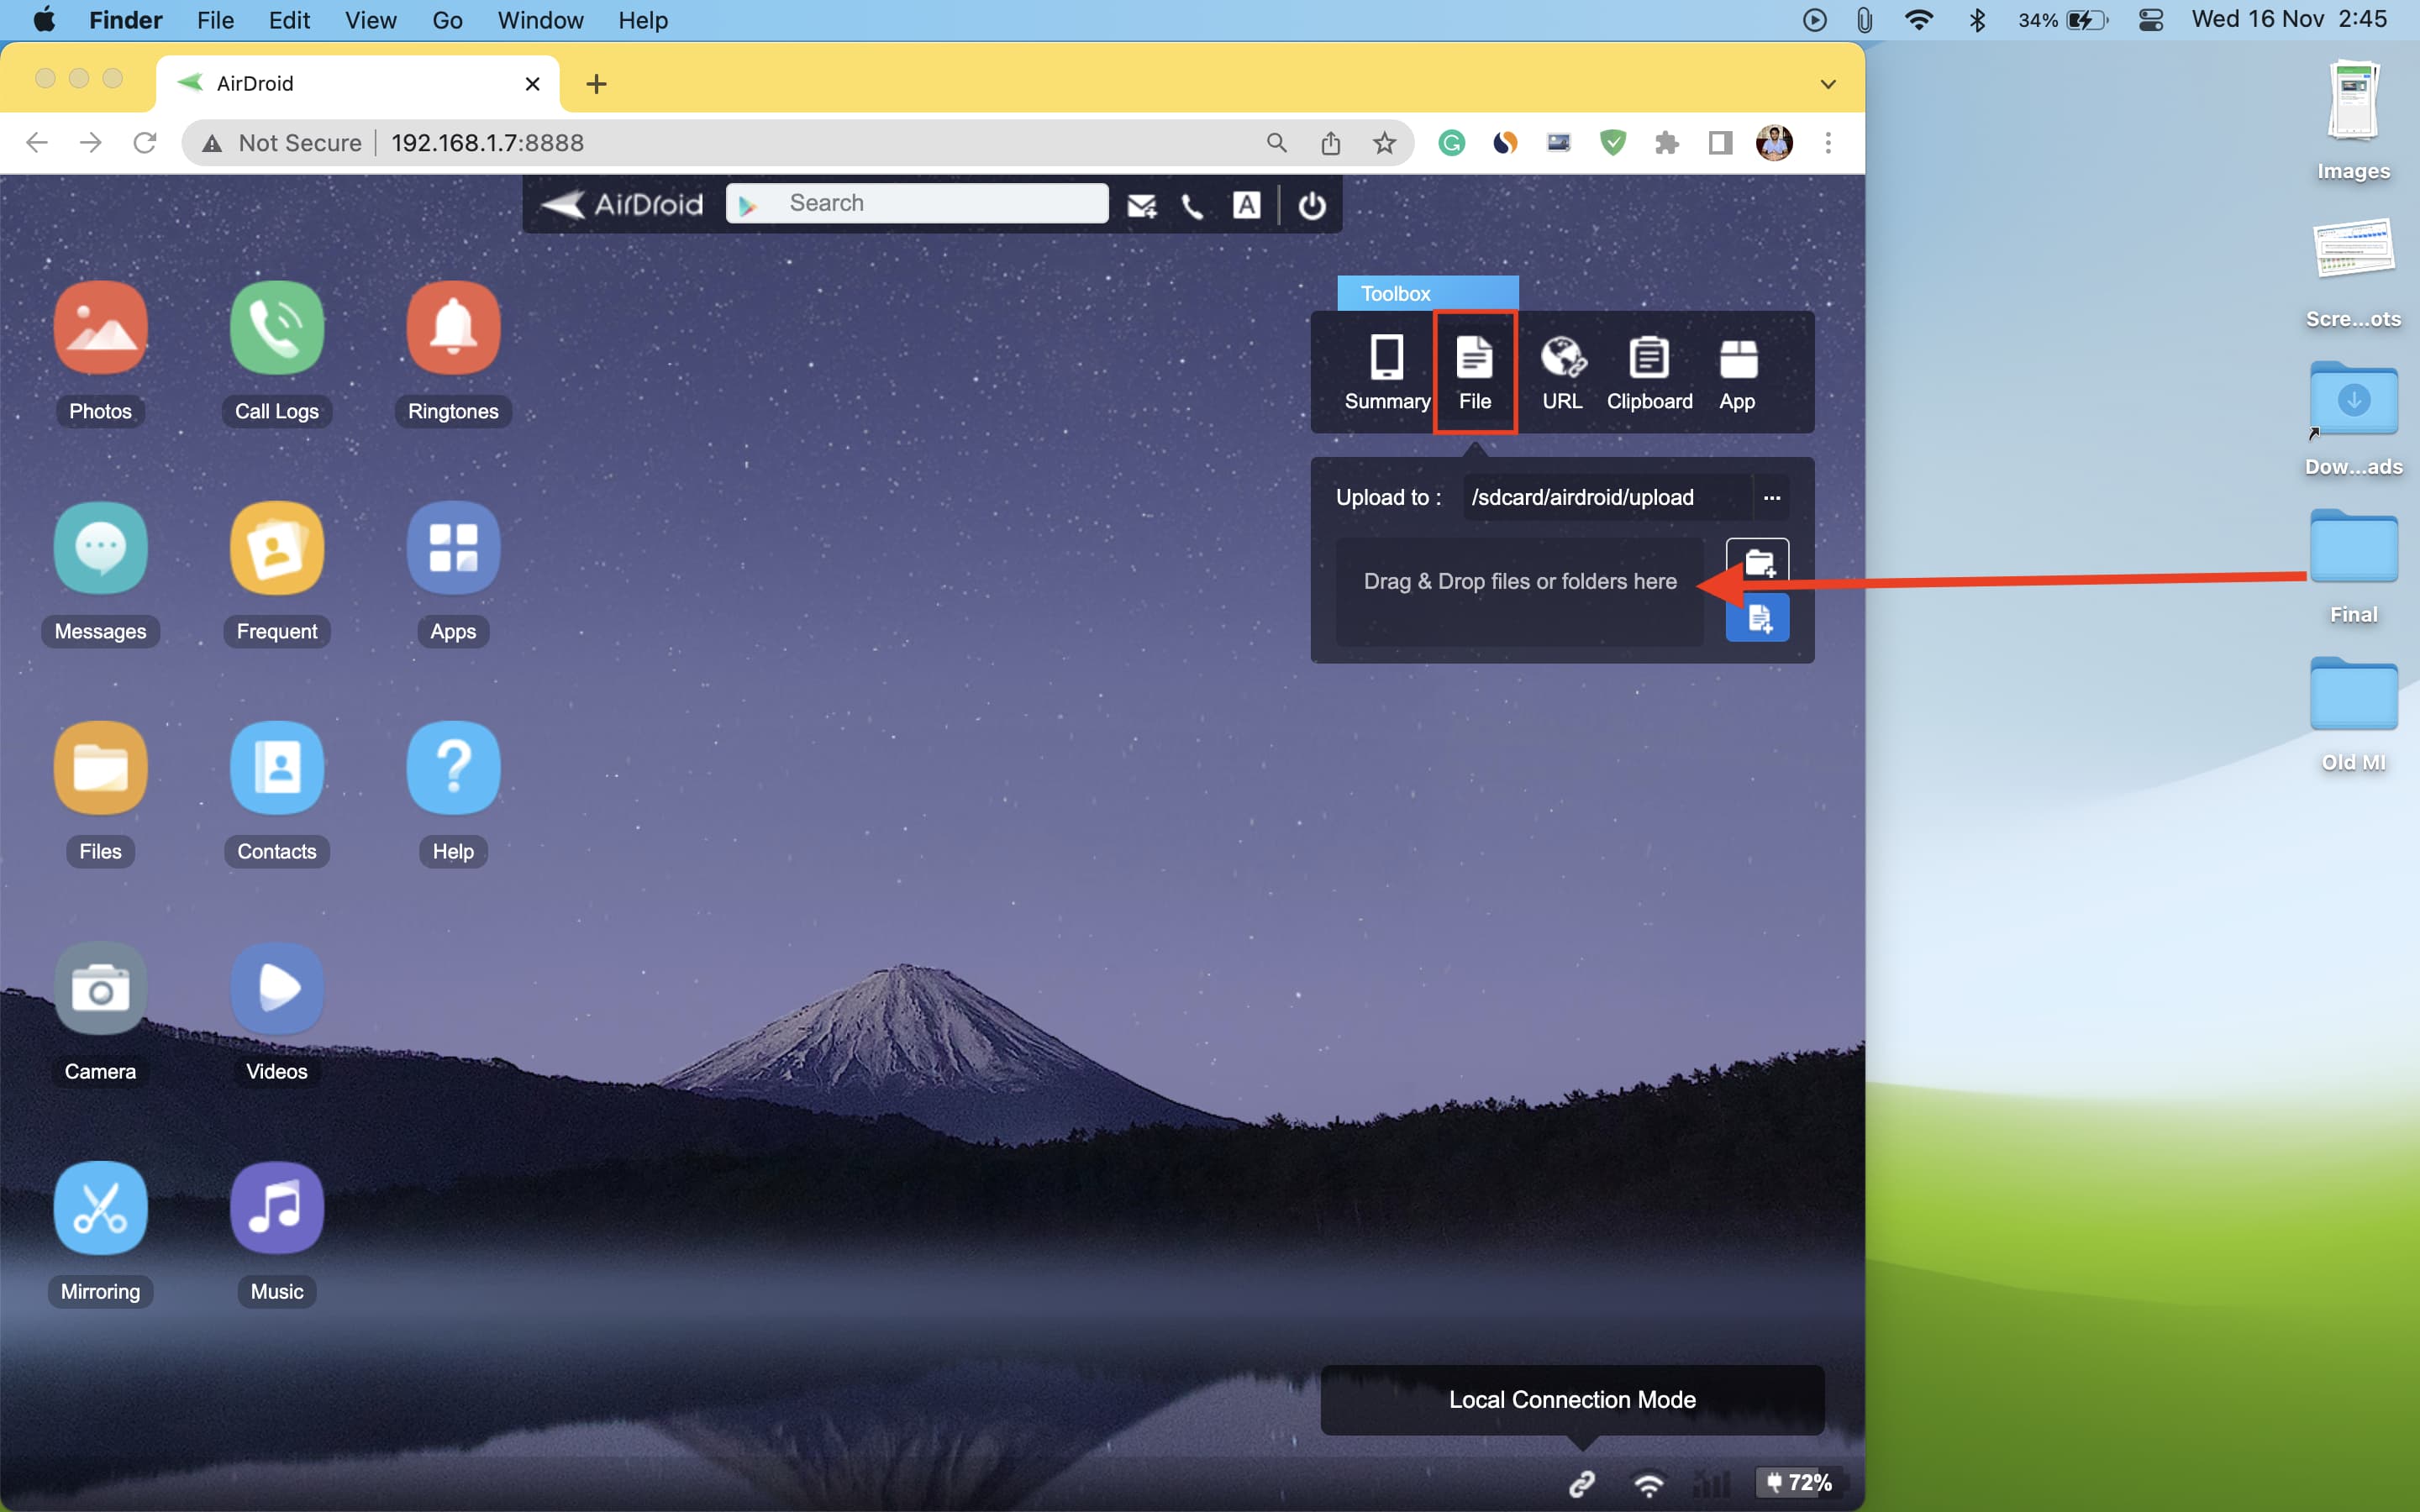 Send file from Mac to Android wirelessly using AirDroid